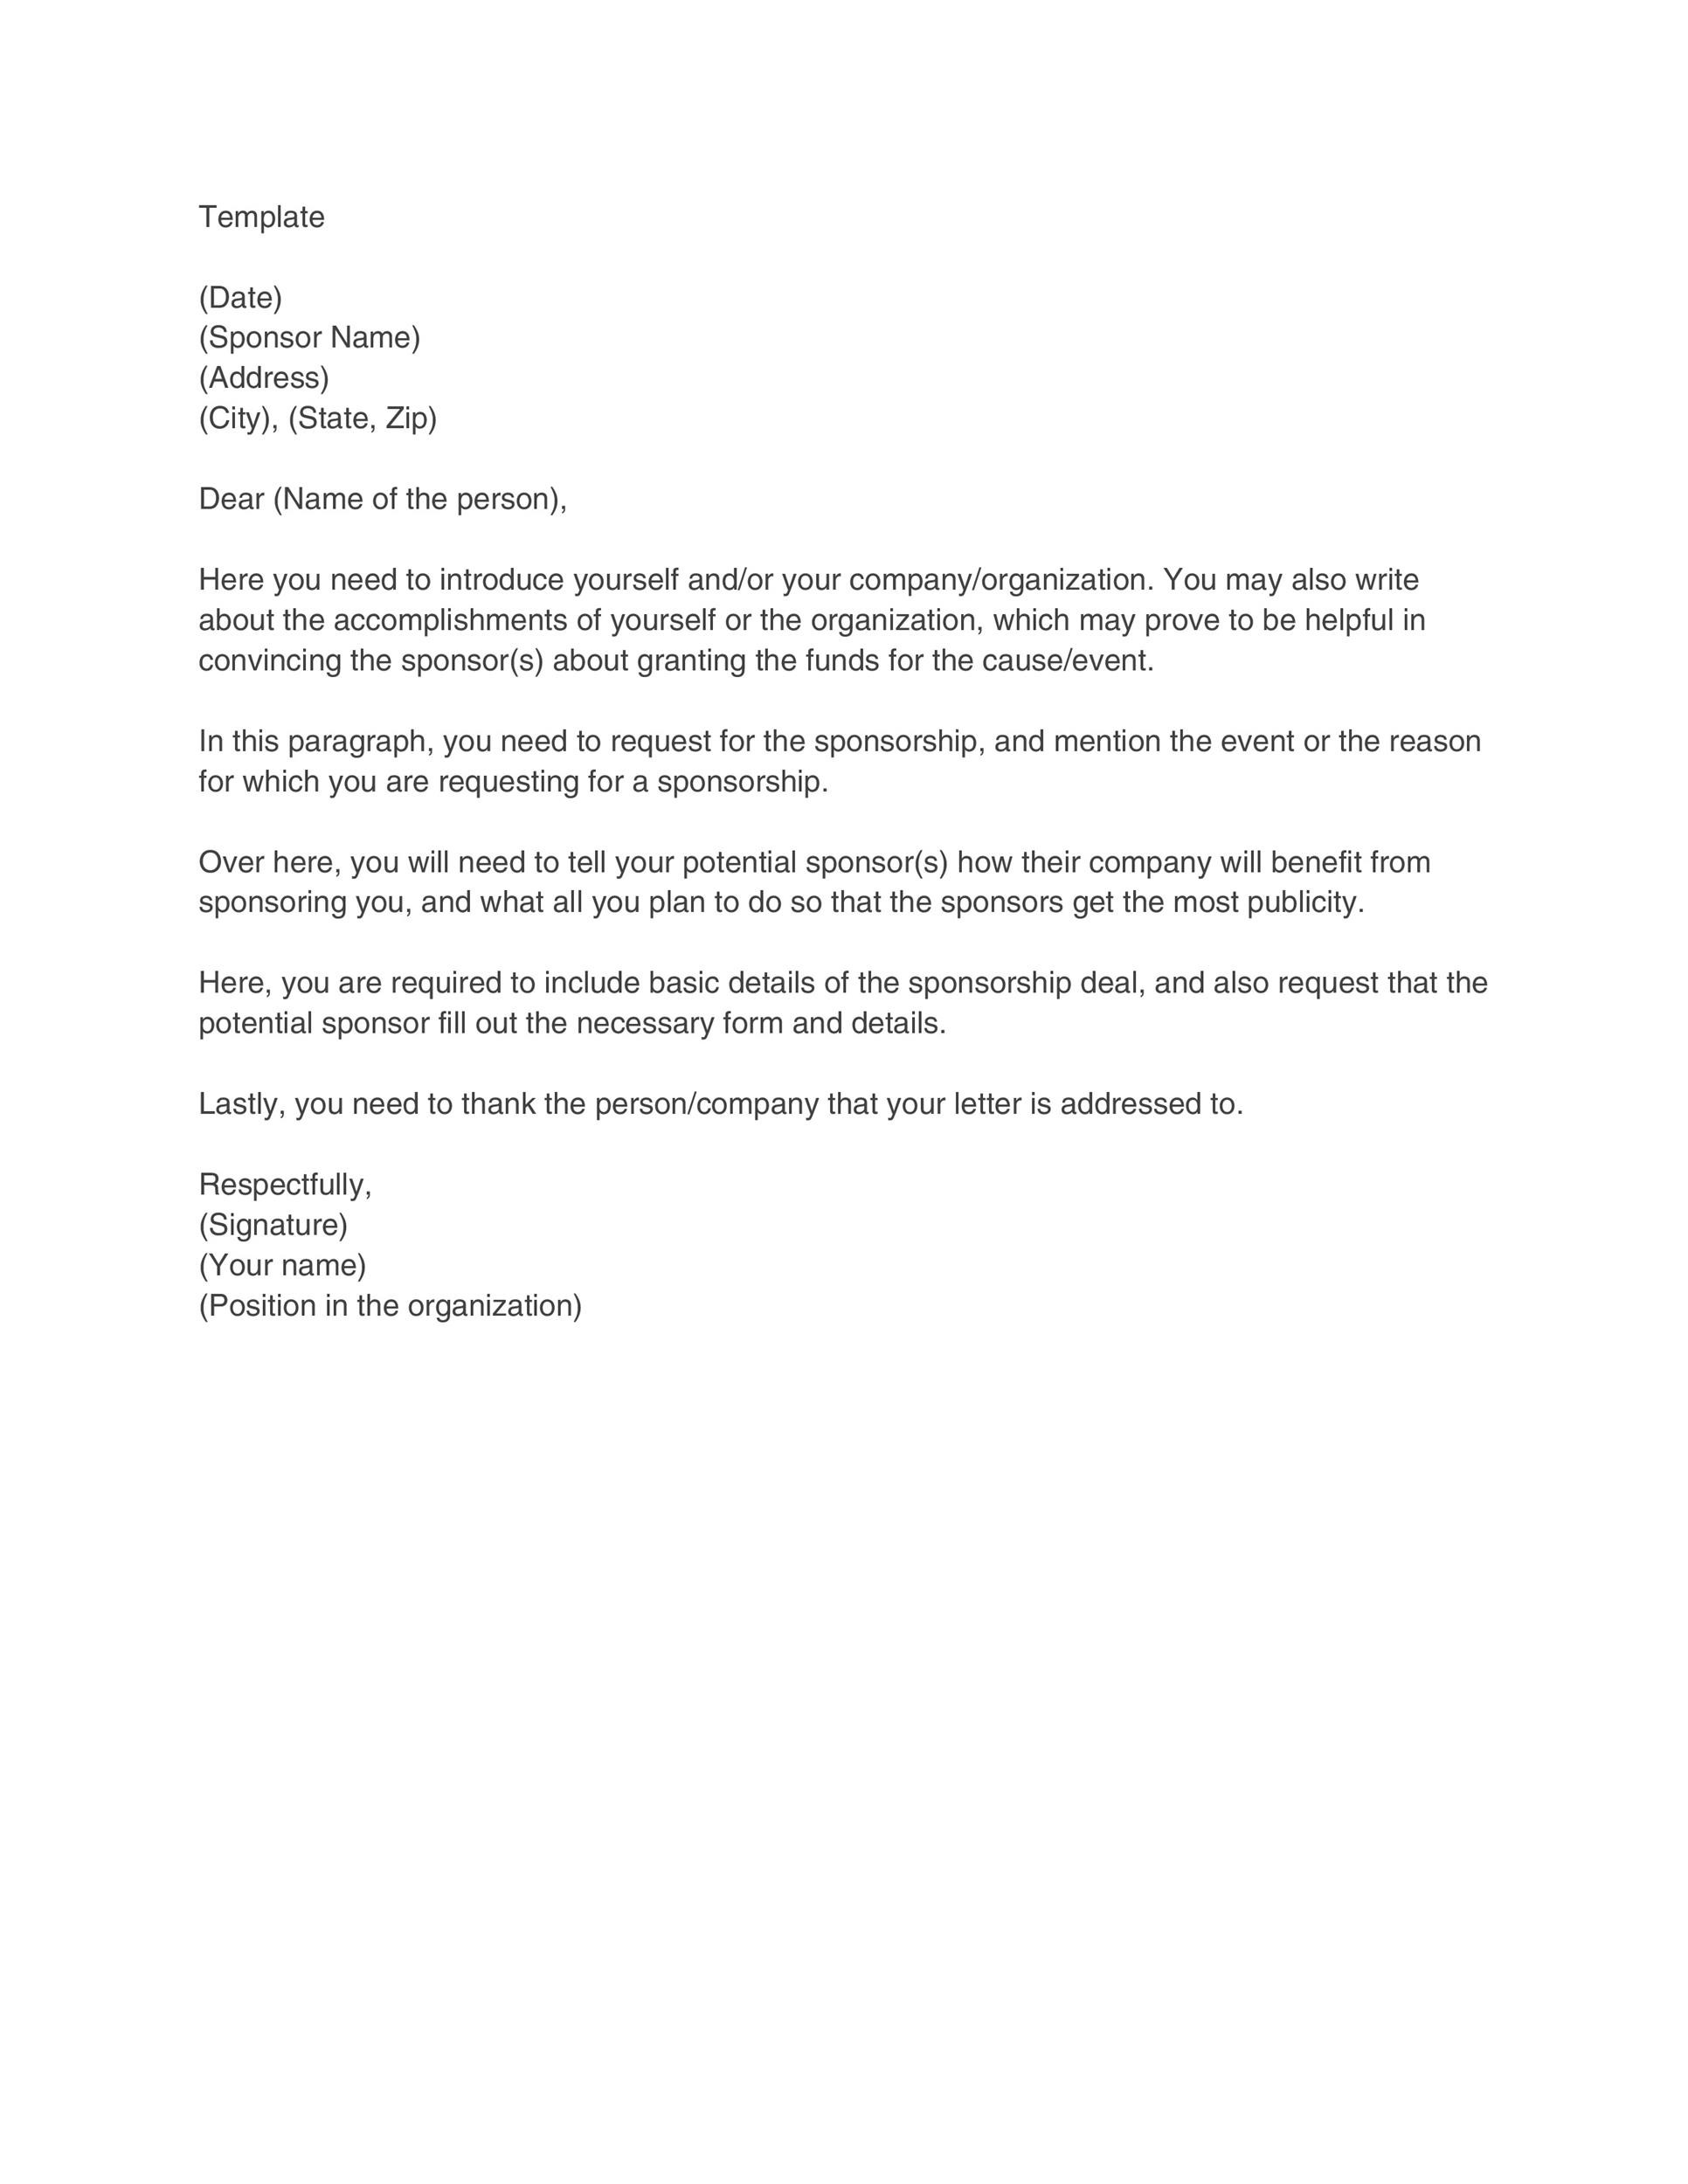 Sponsorship Letter For Pageant from templatelab.com